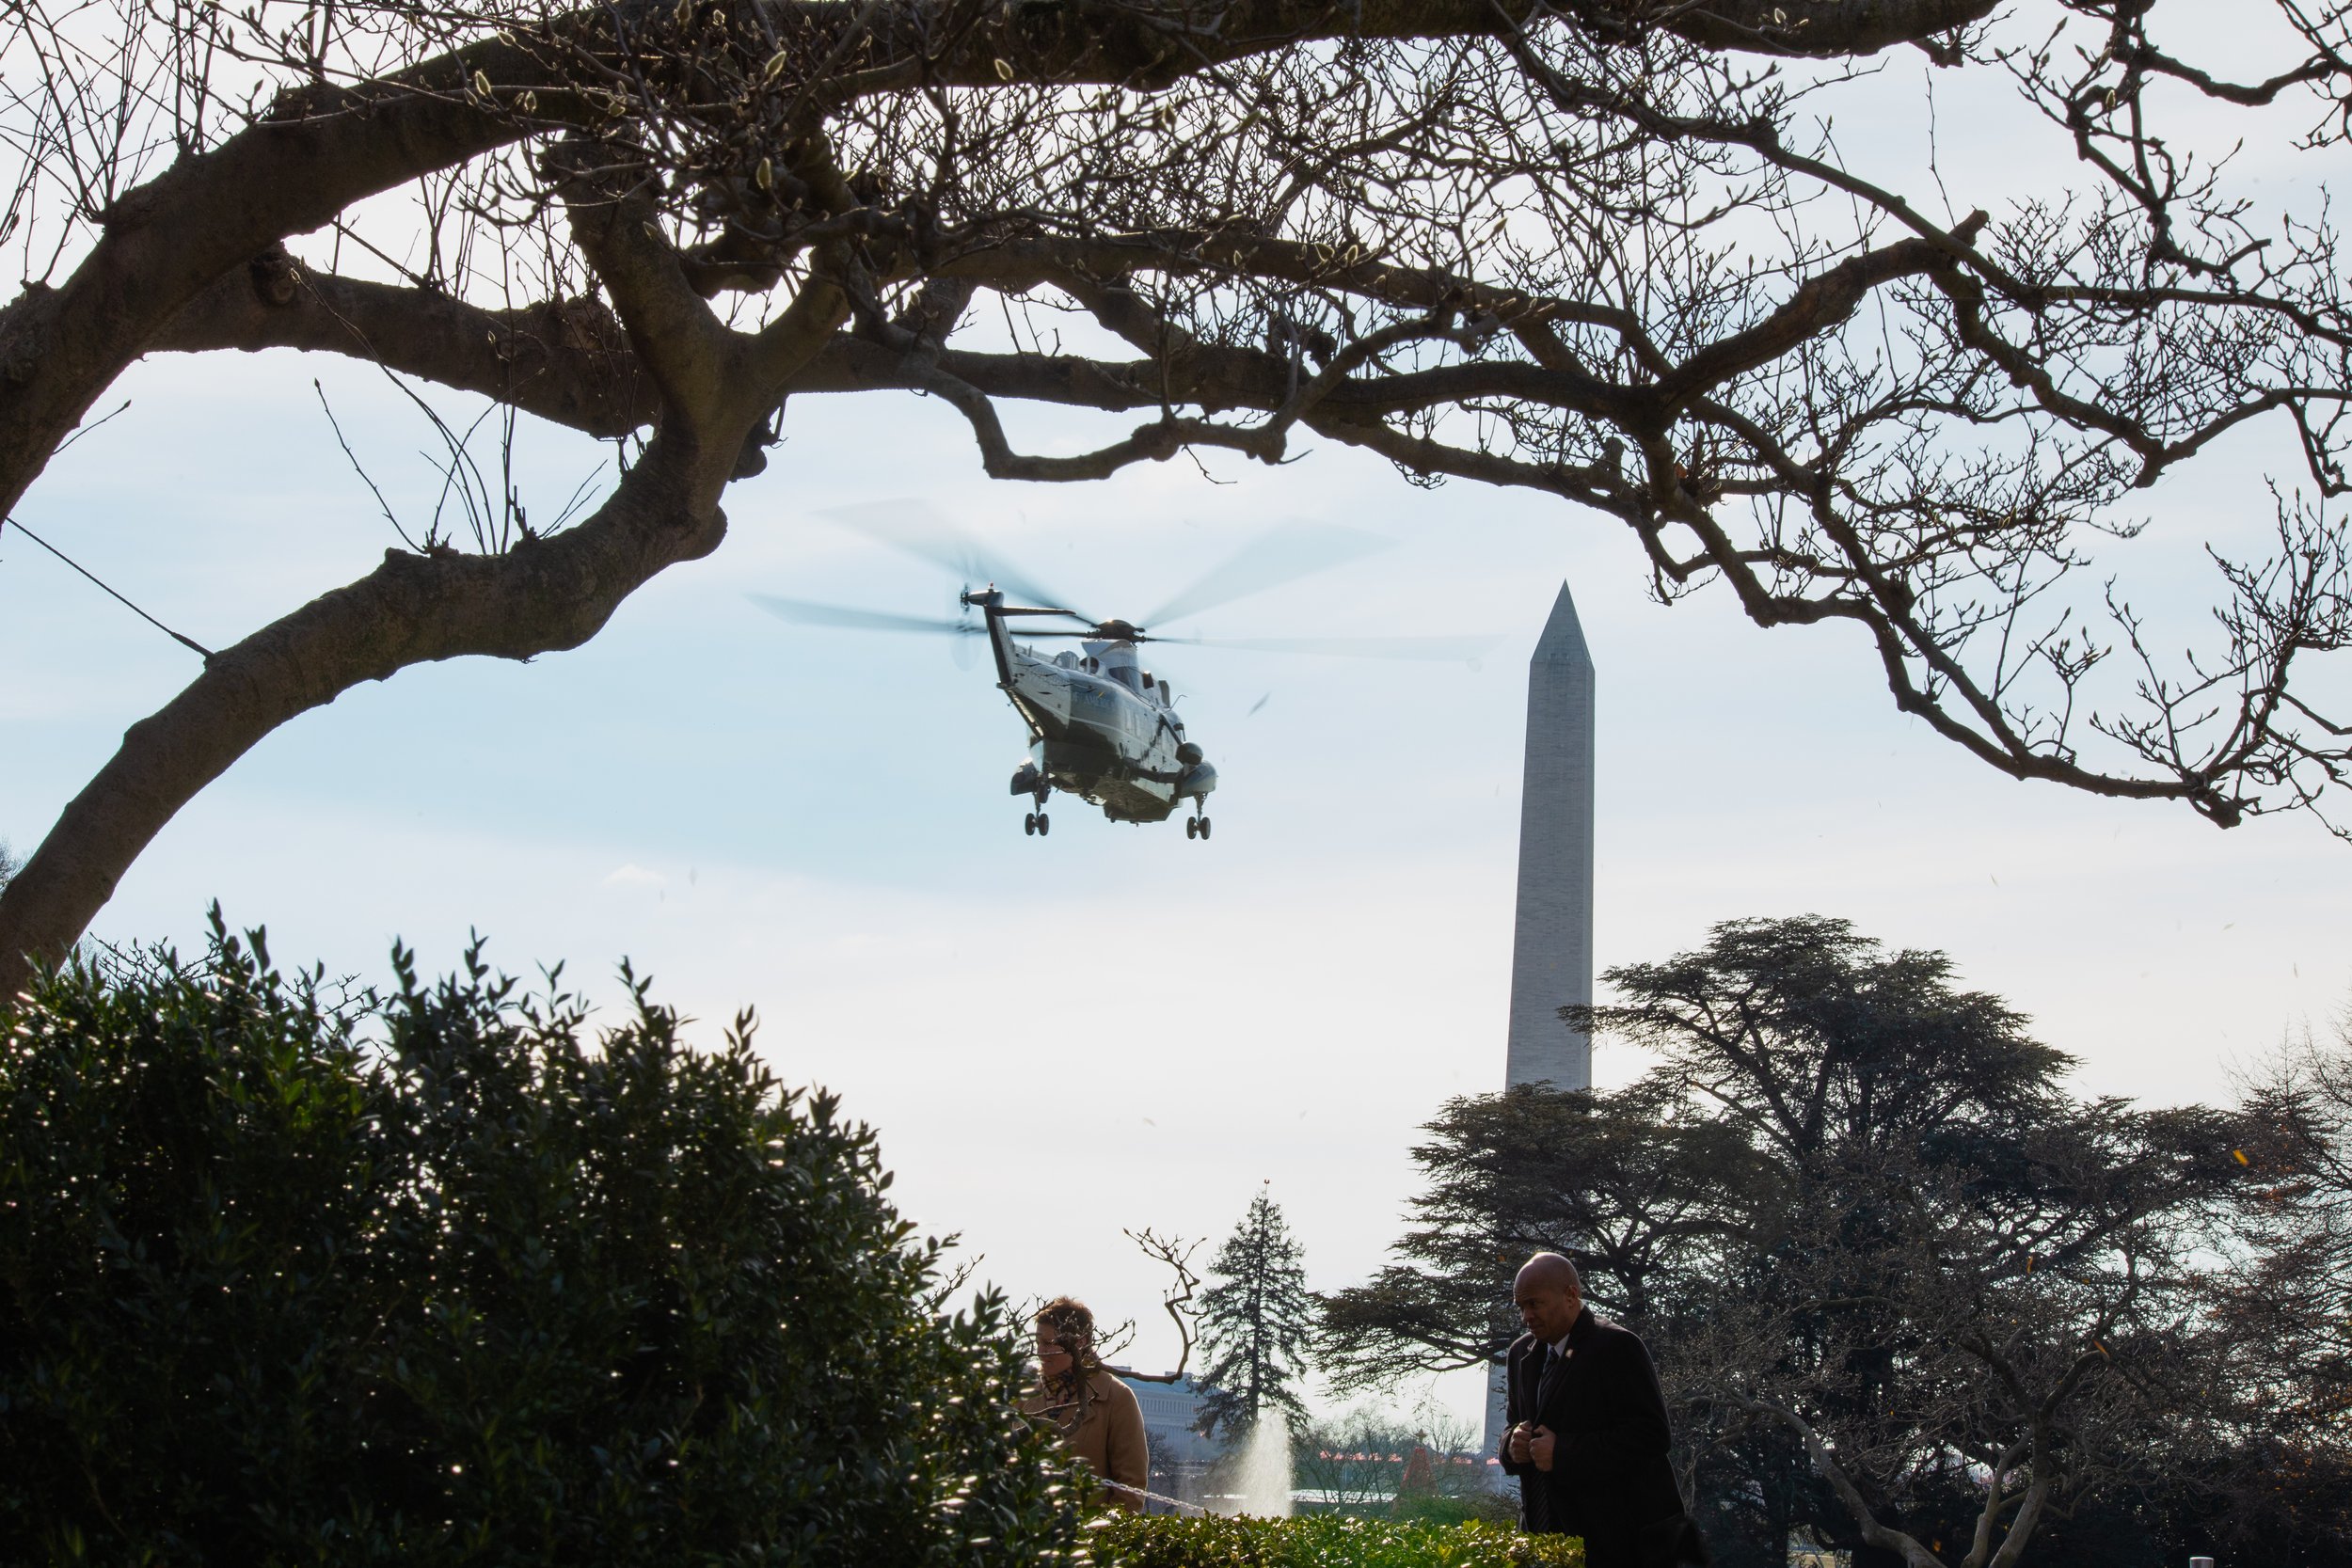  Marine One departs from the White House carrying President Trump and First Lady Melania Trump.    November 2018   